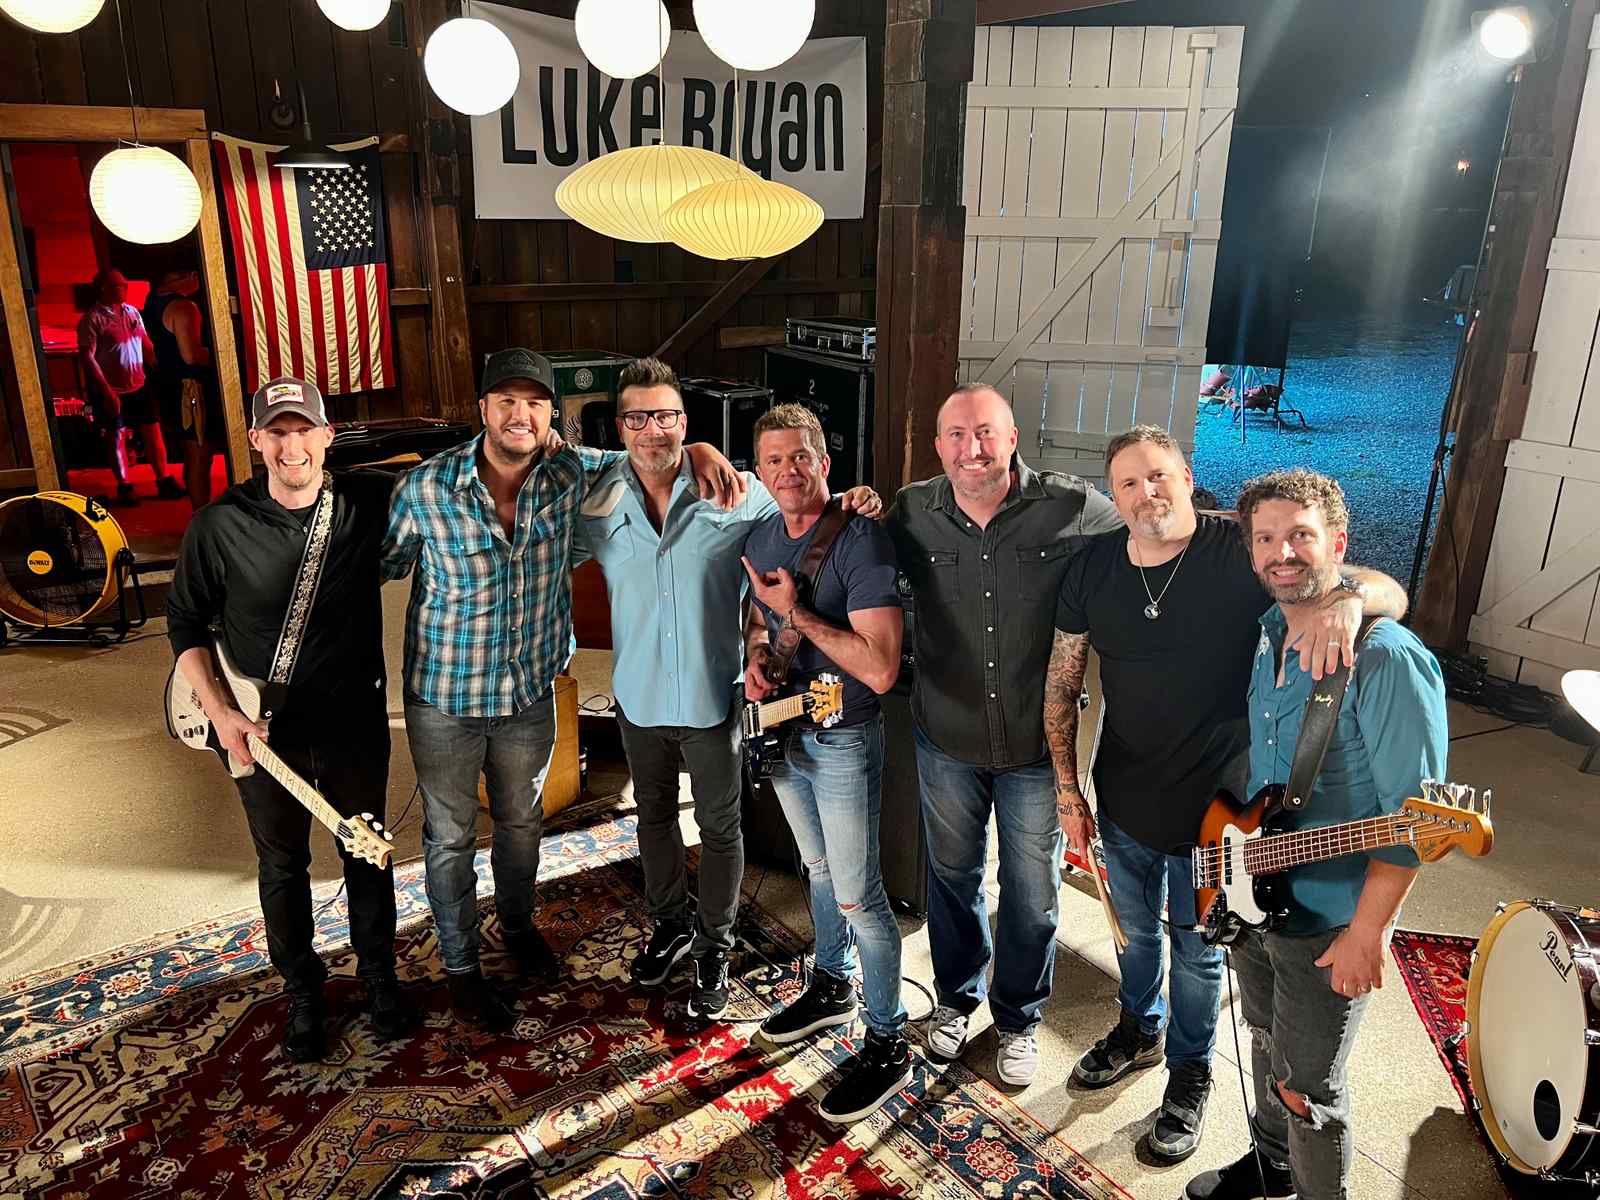 Luke Bryan Releases New Music Video for “But I Got A Beer In My Hand”